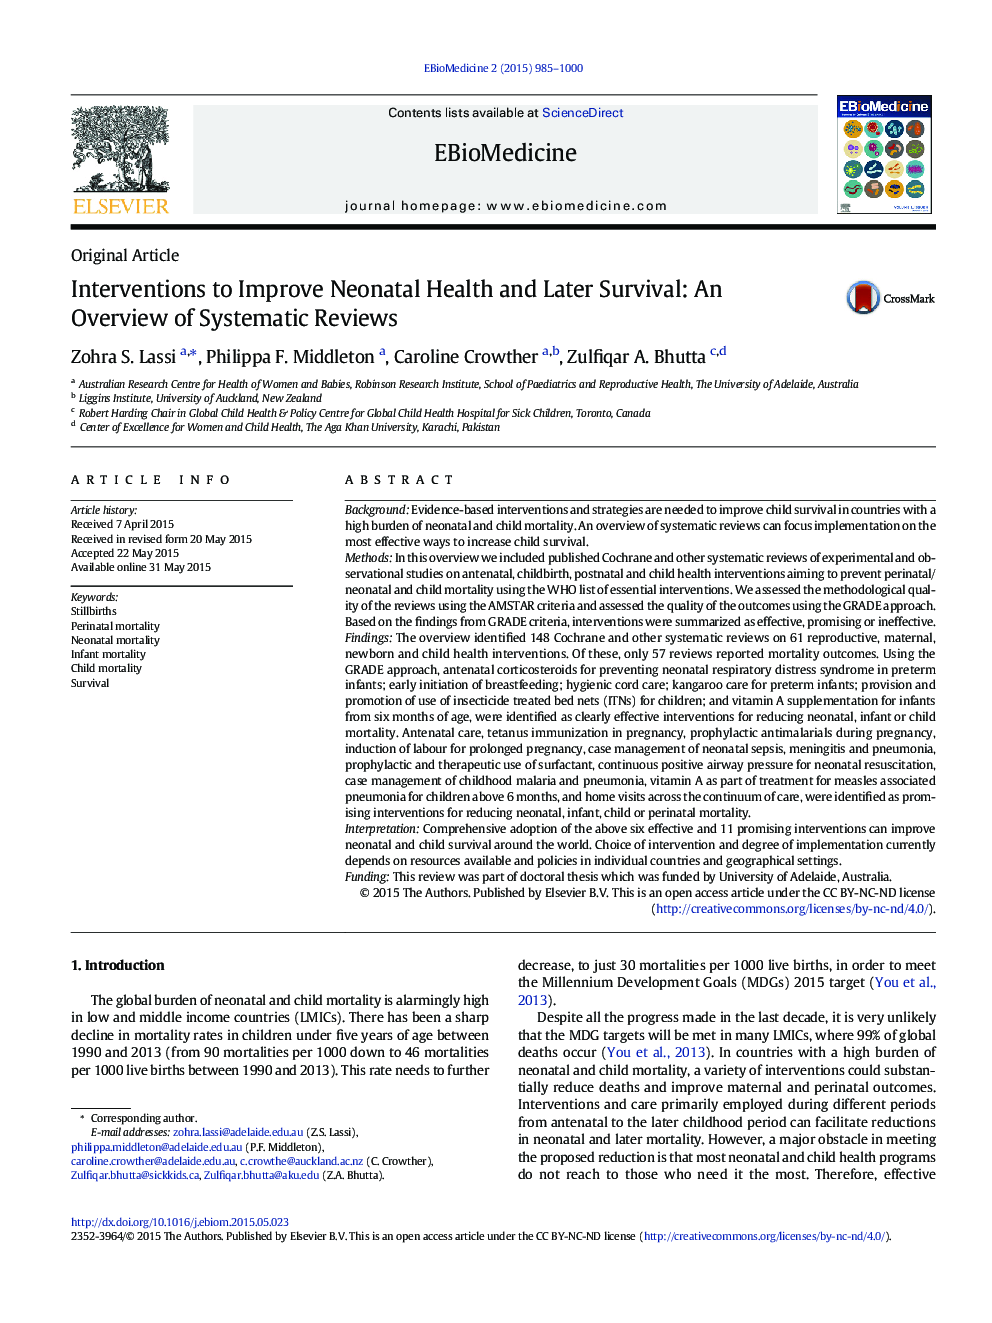 Interventions to Improve Neonatal Health and Later Survival: An Overview of Systematic Reviews